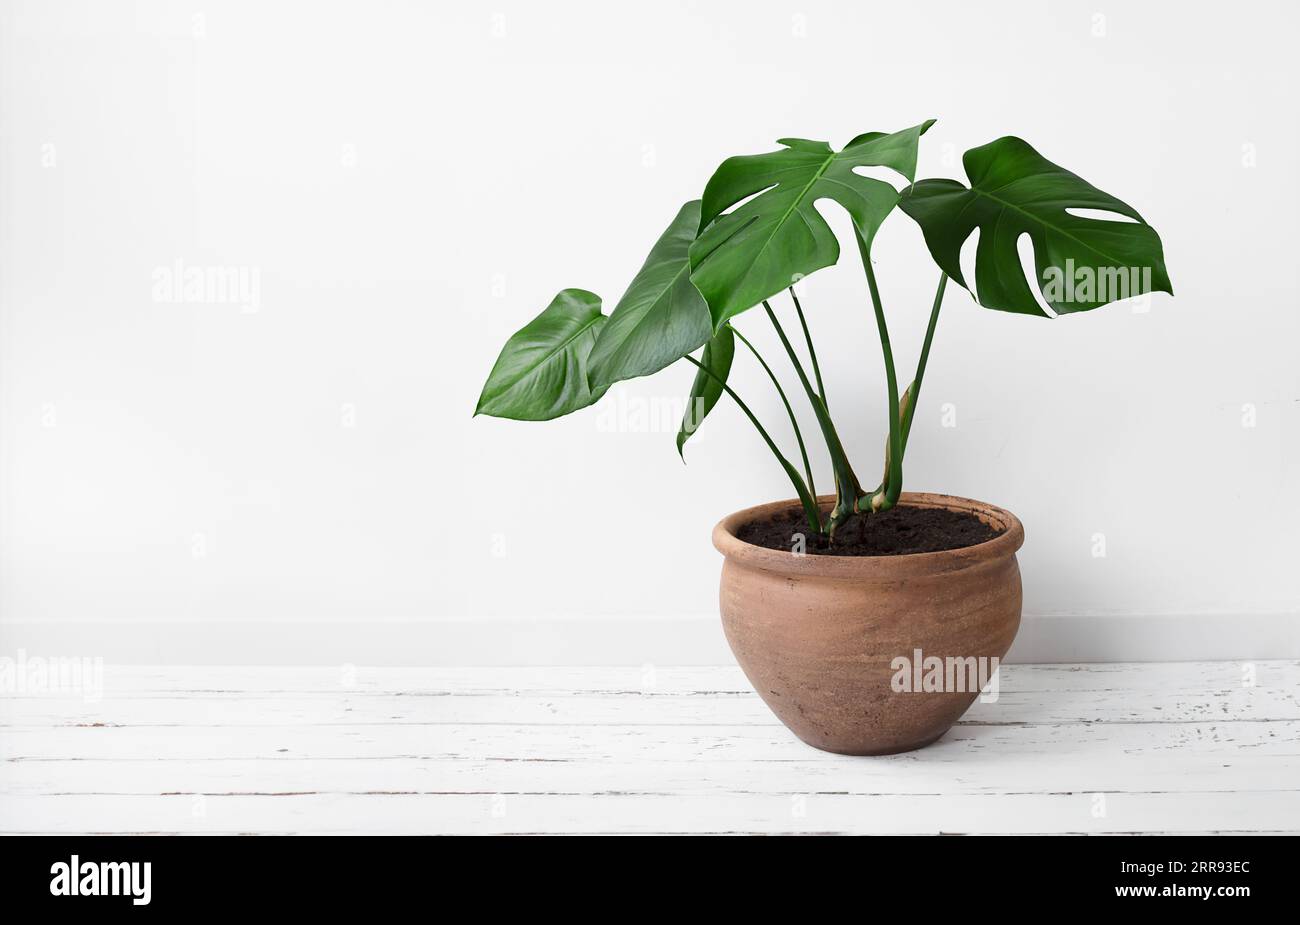 Monstera deliciosa or Swiss Cheese Plant in a clay pot on a white background, home gardening and connecting with nature, with copy space Stock Photo